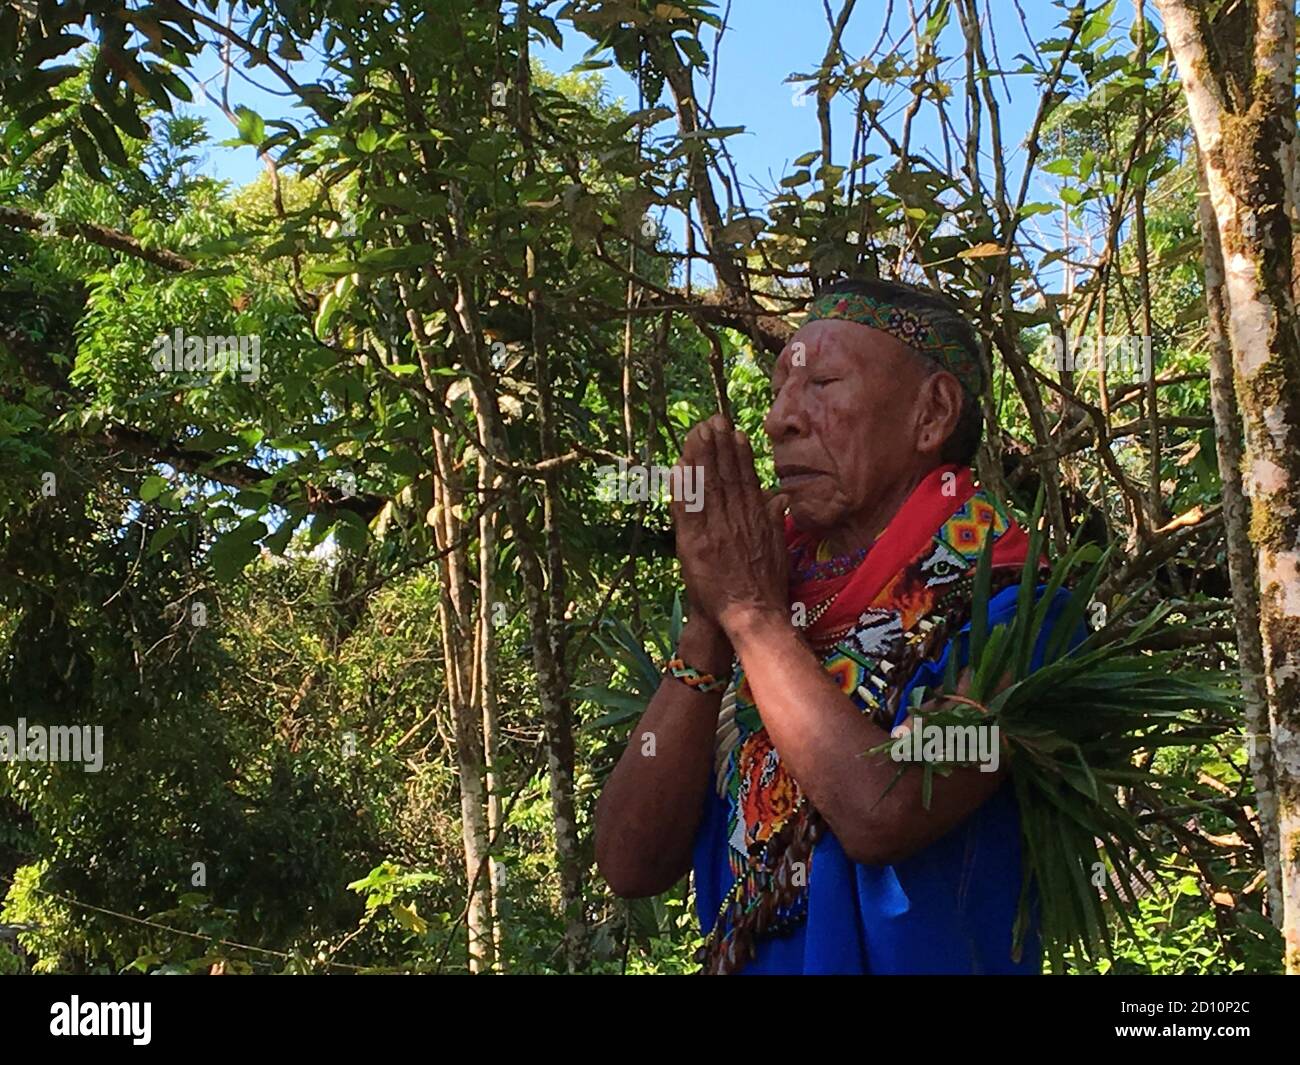 Nueva Loja, Sucumbios / Ecuador - September 2 2020: Elderly indigenous shaman of Cofan nationality praying with his hands joined and eyes closed in th Stock Photo